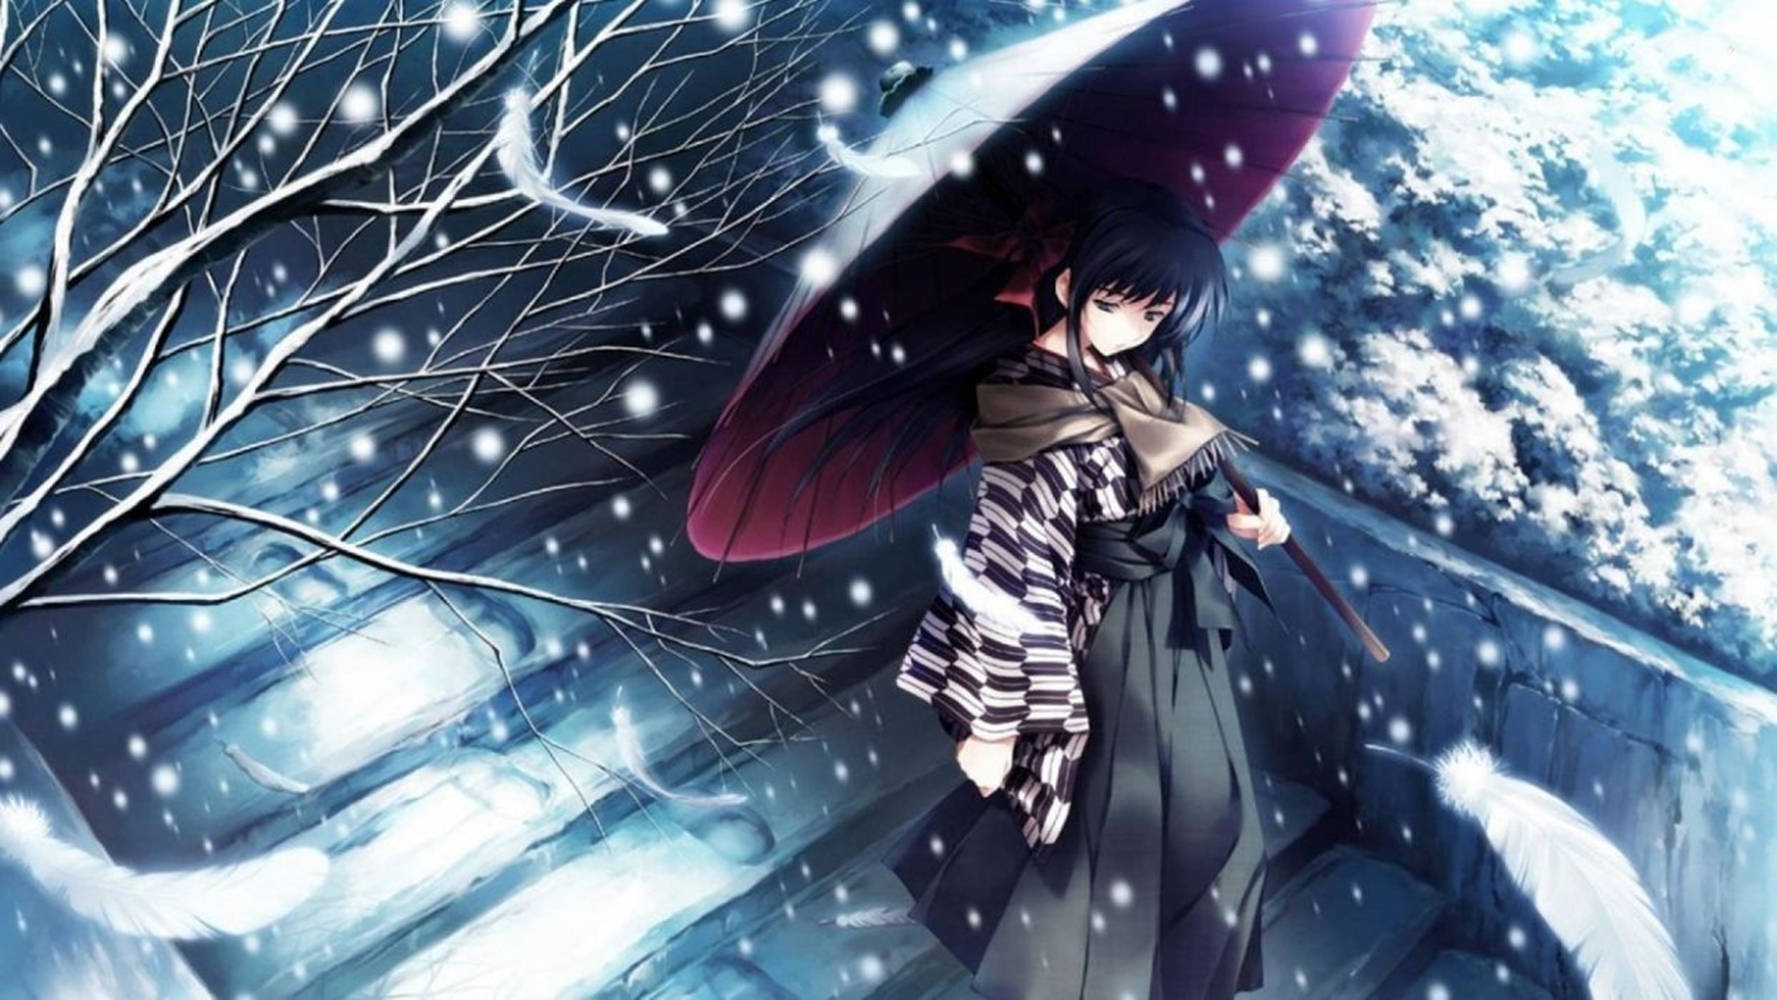 Anime Girl Sad Alone With Parasol Winter Aesthetic Wallpaper